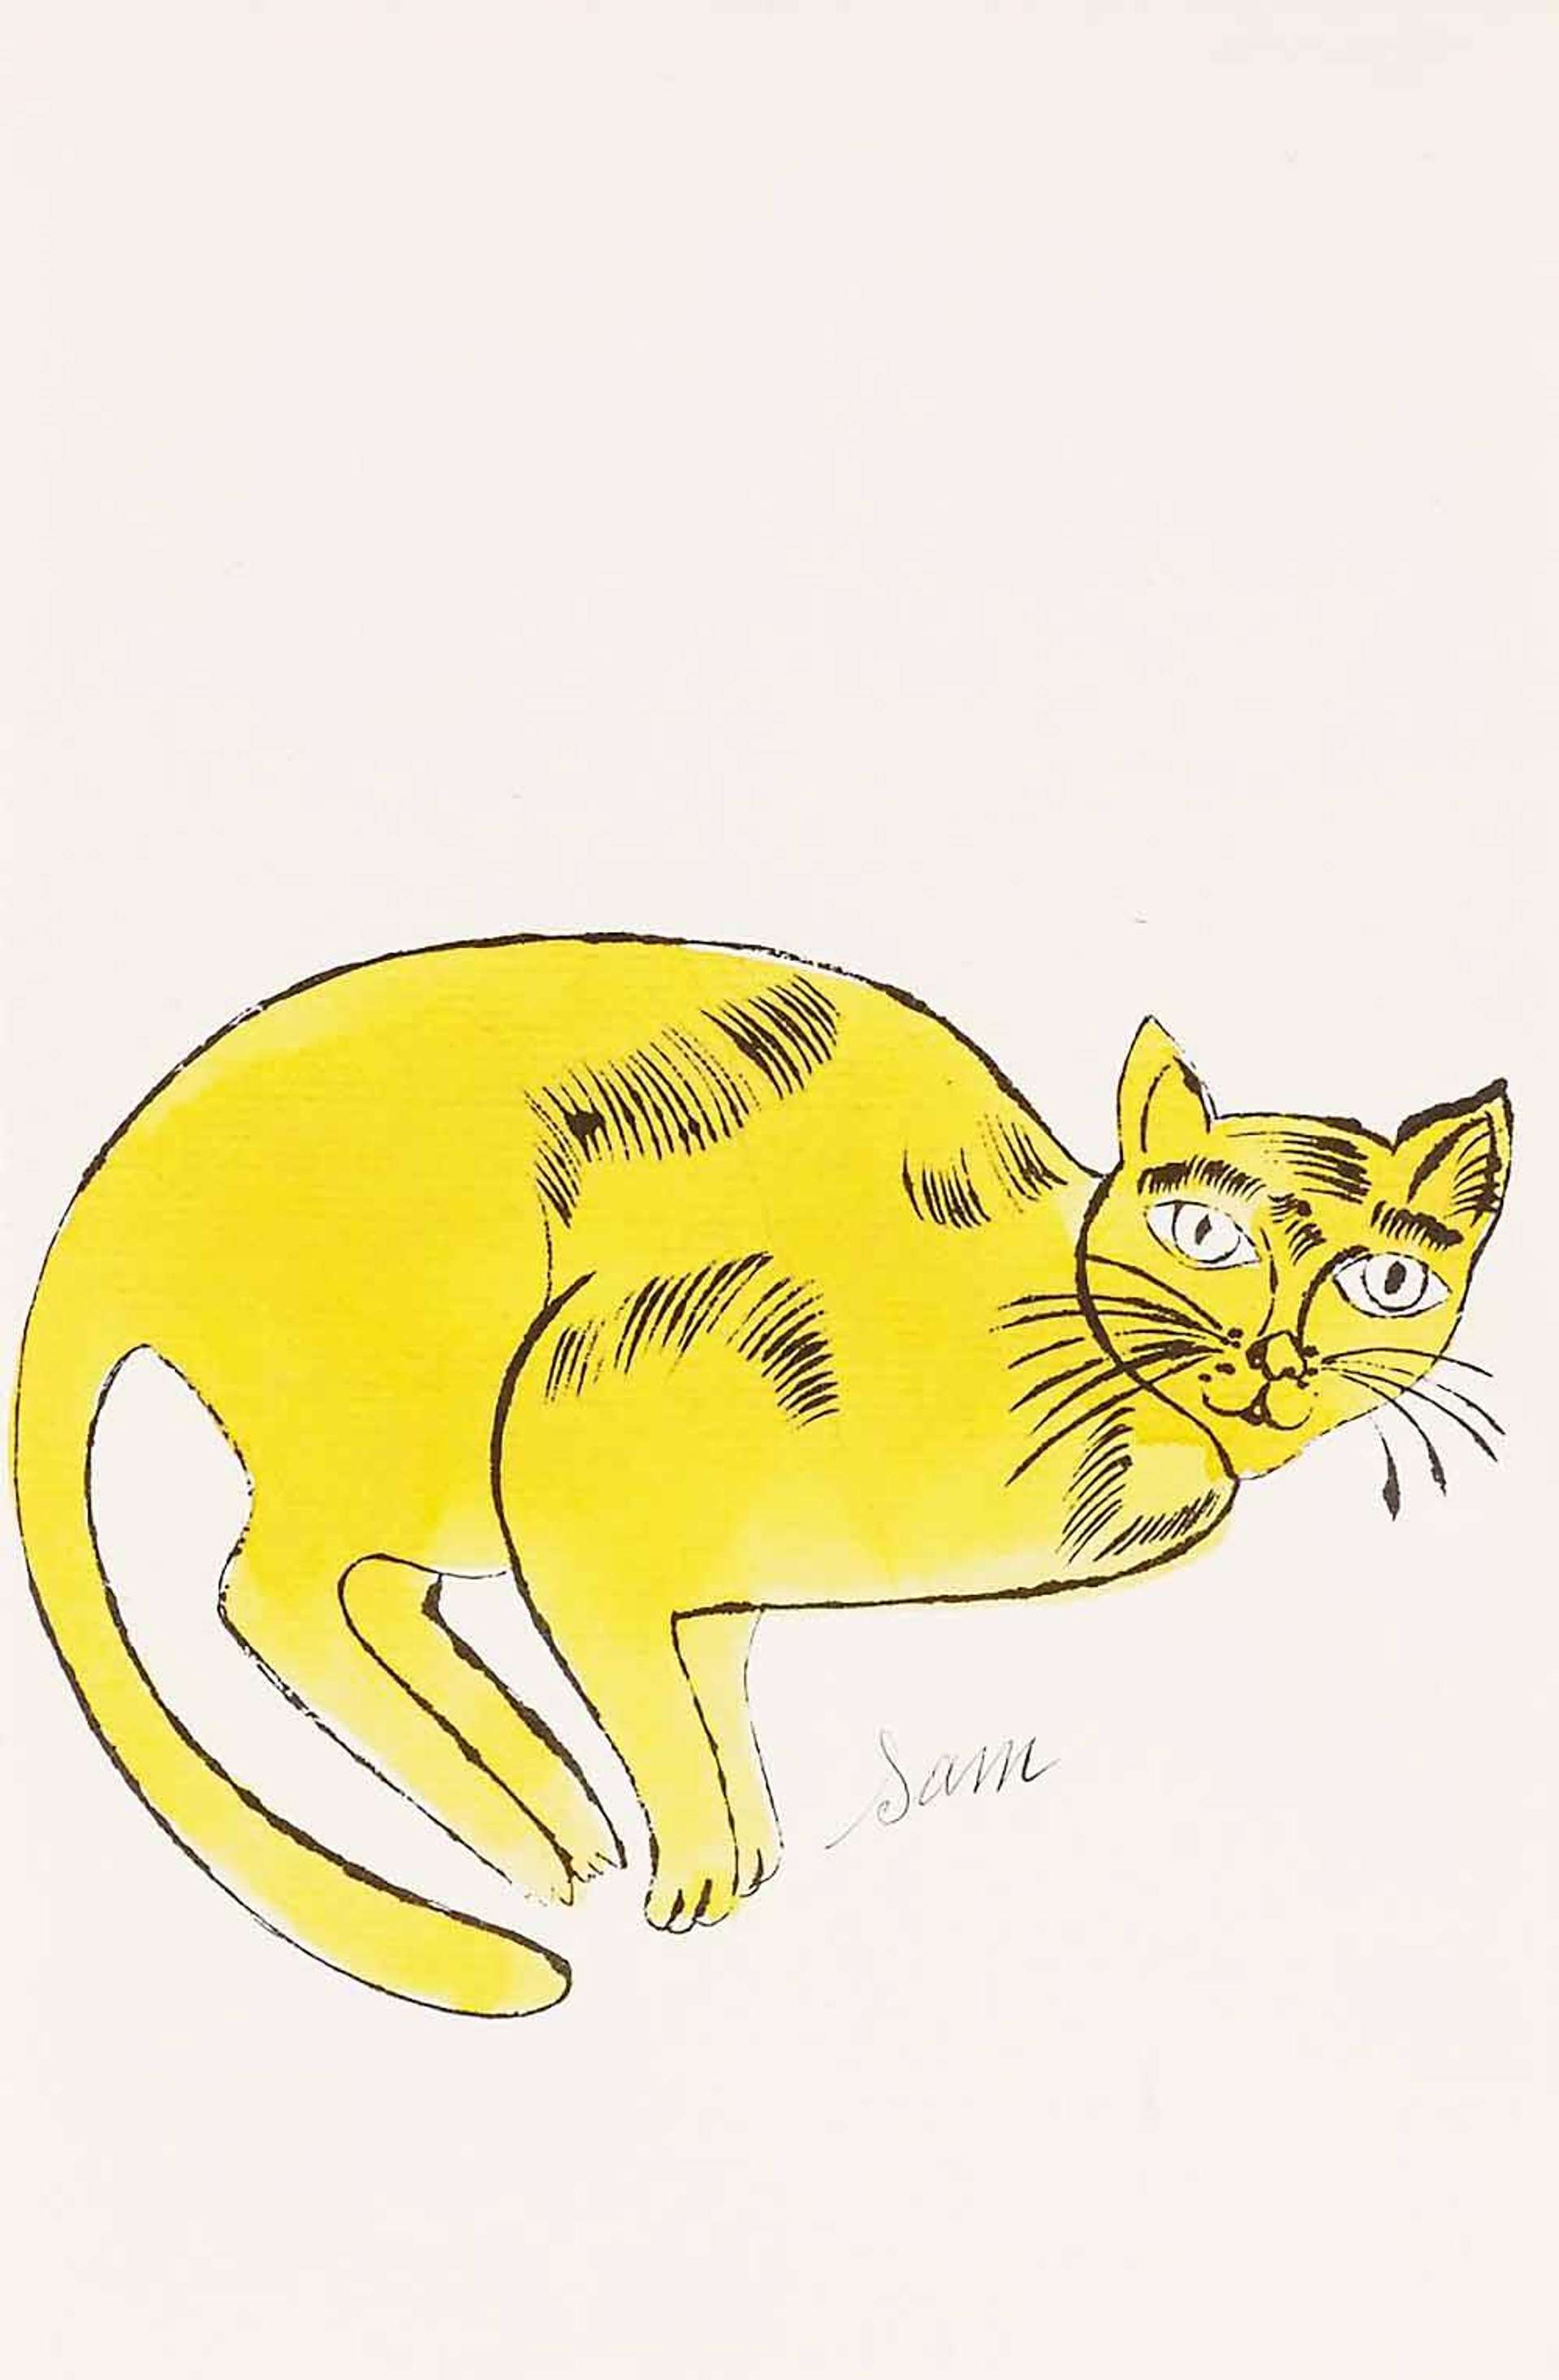 Cats Named Sam IV 67 - Unsigned Print by Andy Warhol 1954 - MyArtBroker